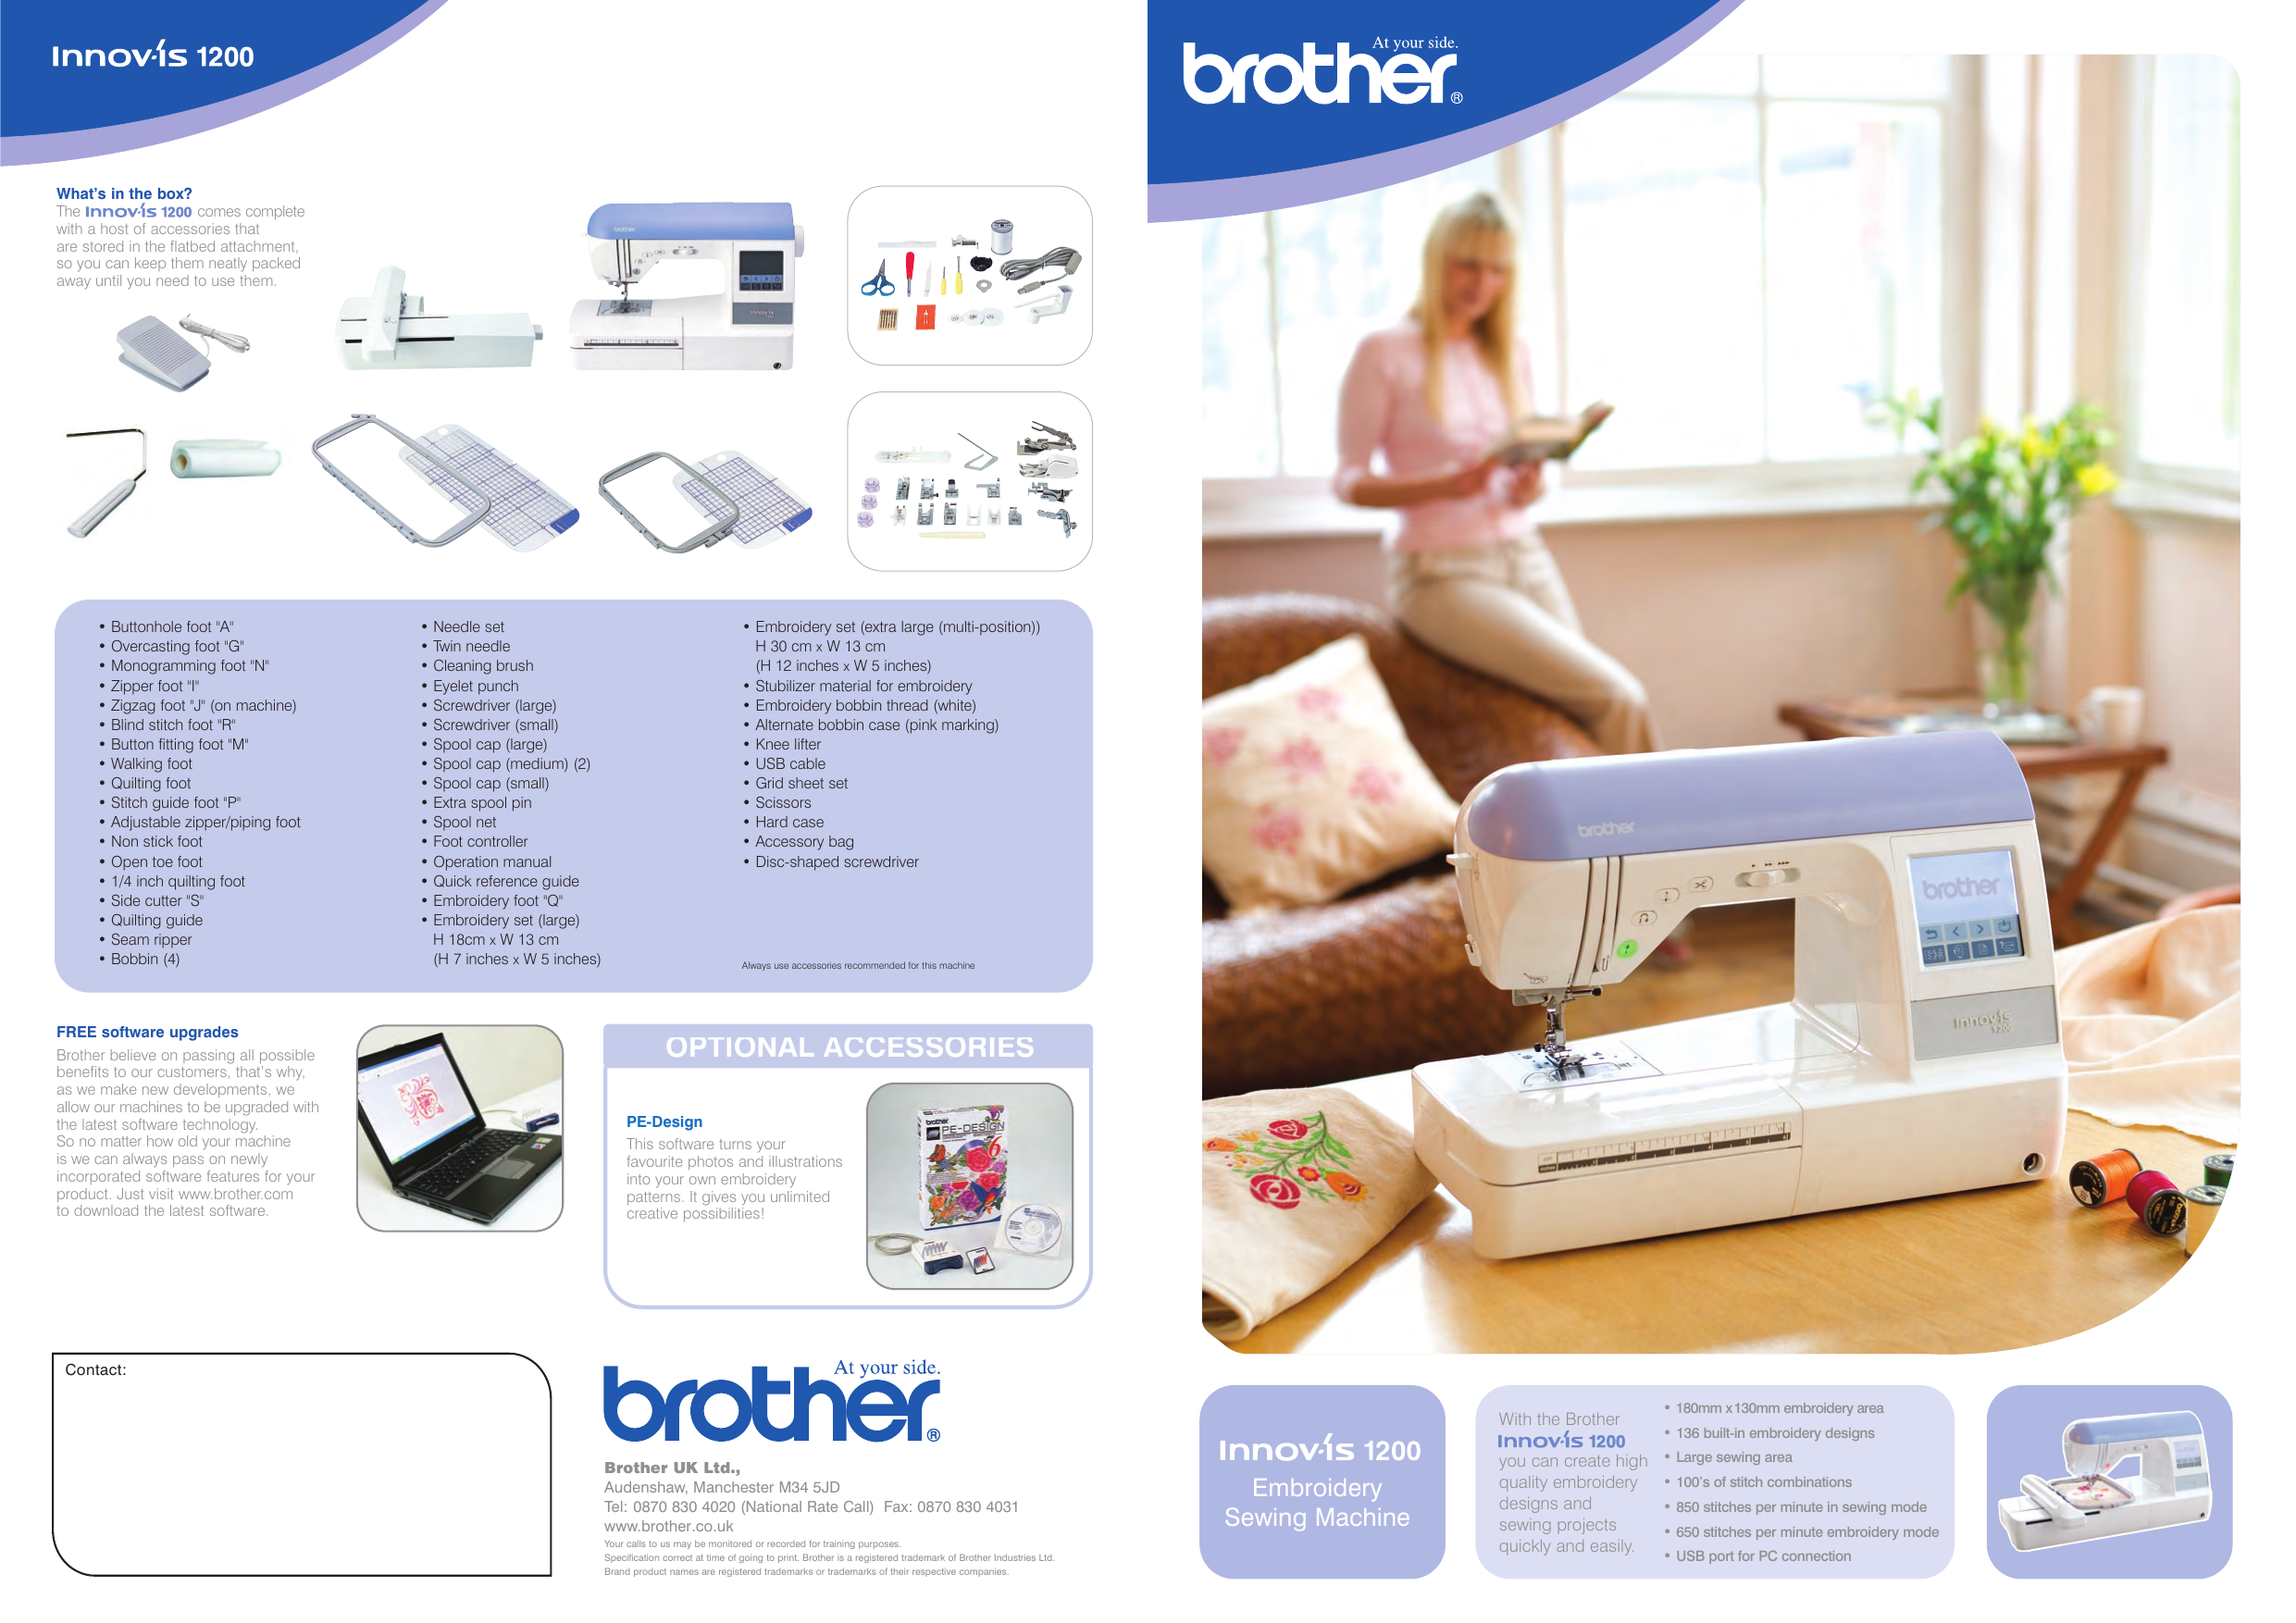 Page 1 of 4 - Brother Brother-P-Touch-1200-Users-Manual- NV1200_200512 E ( - 2)  Brother-p-touch-1200-users-manual